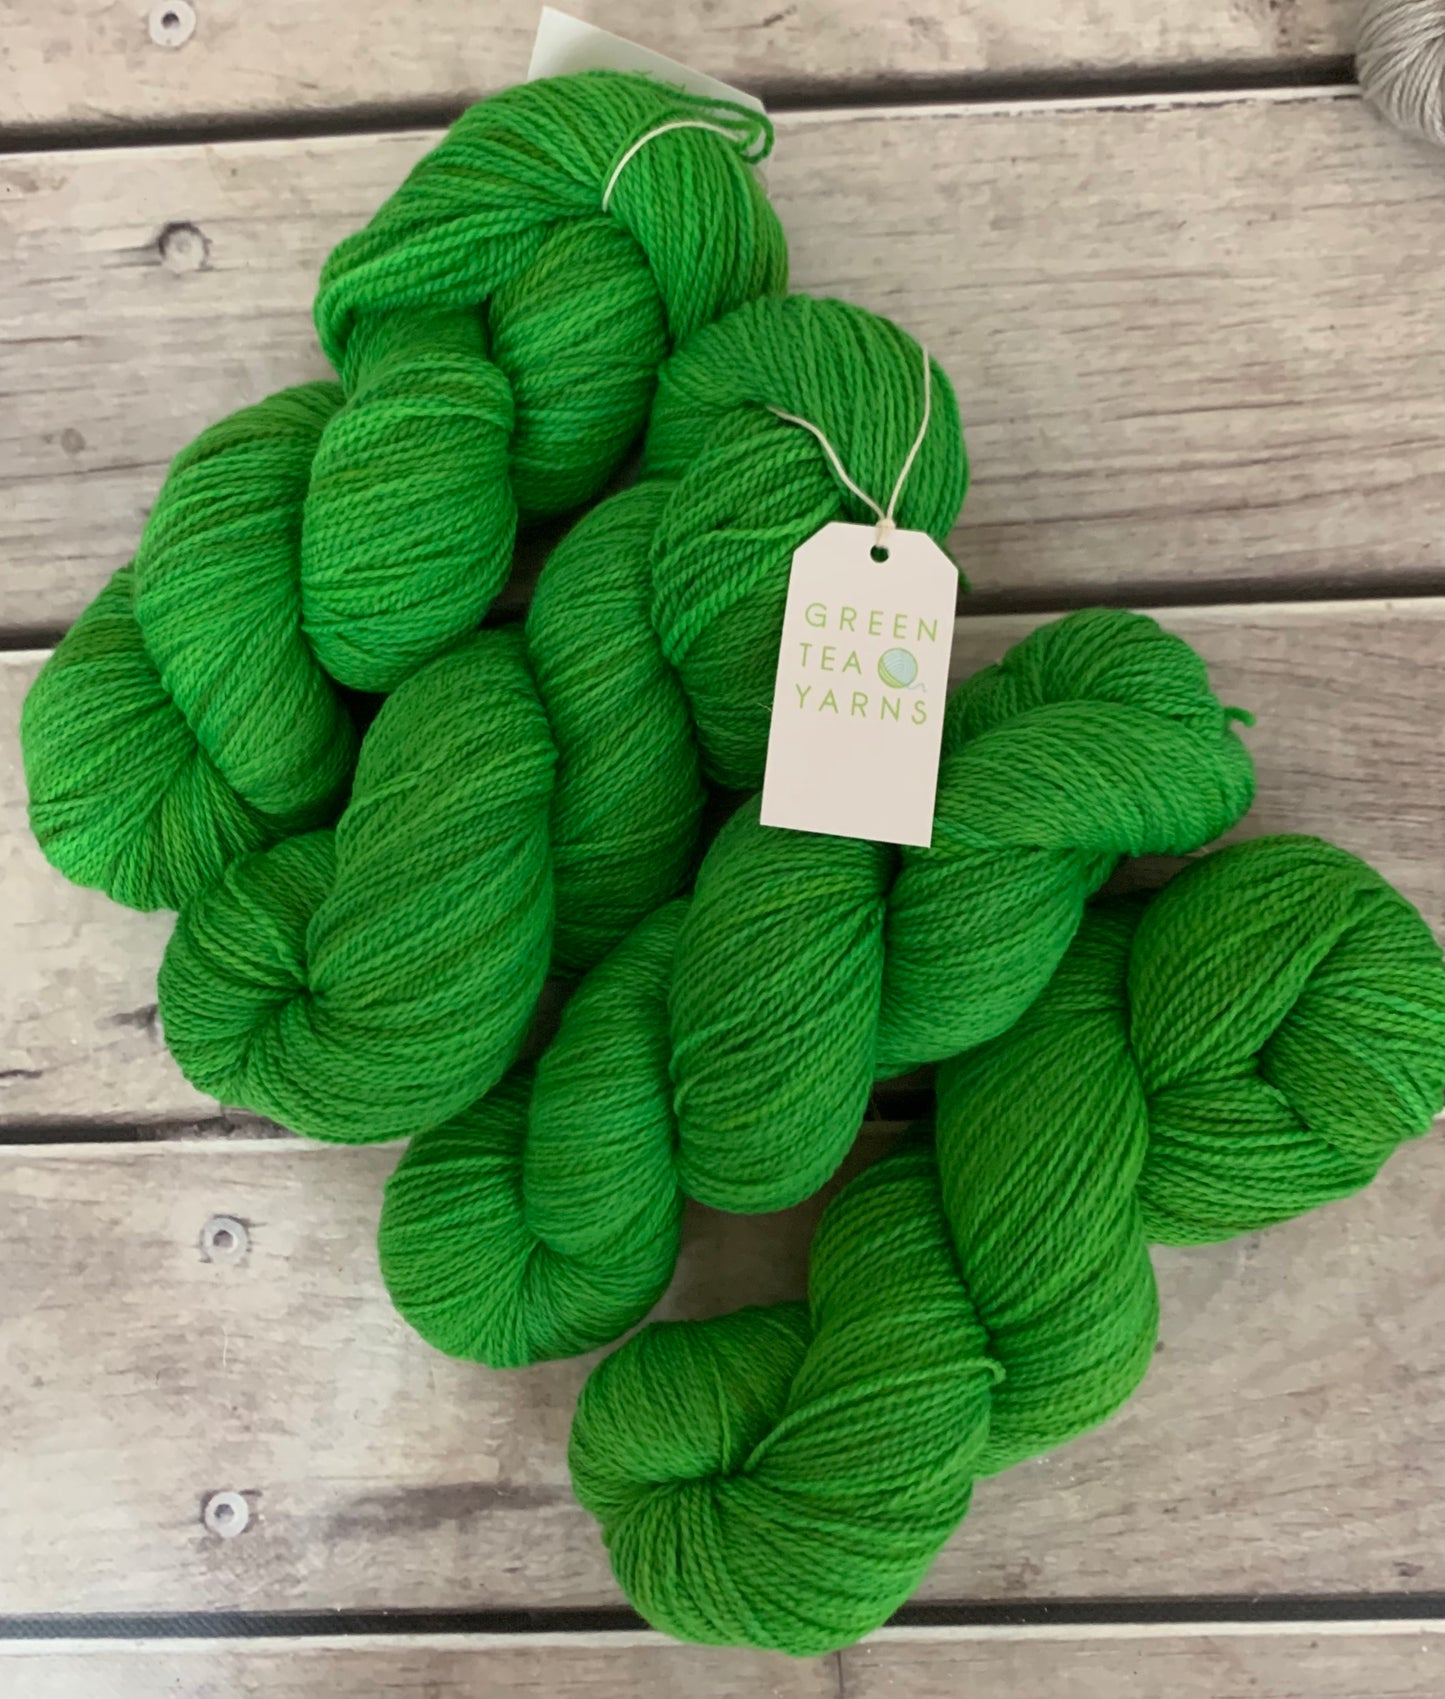 Peacock matching skein Billy 4 - End of Year kit